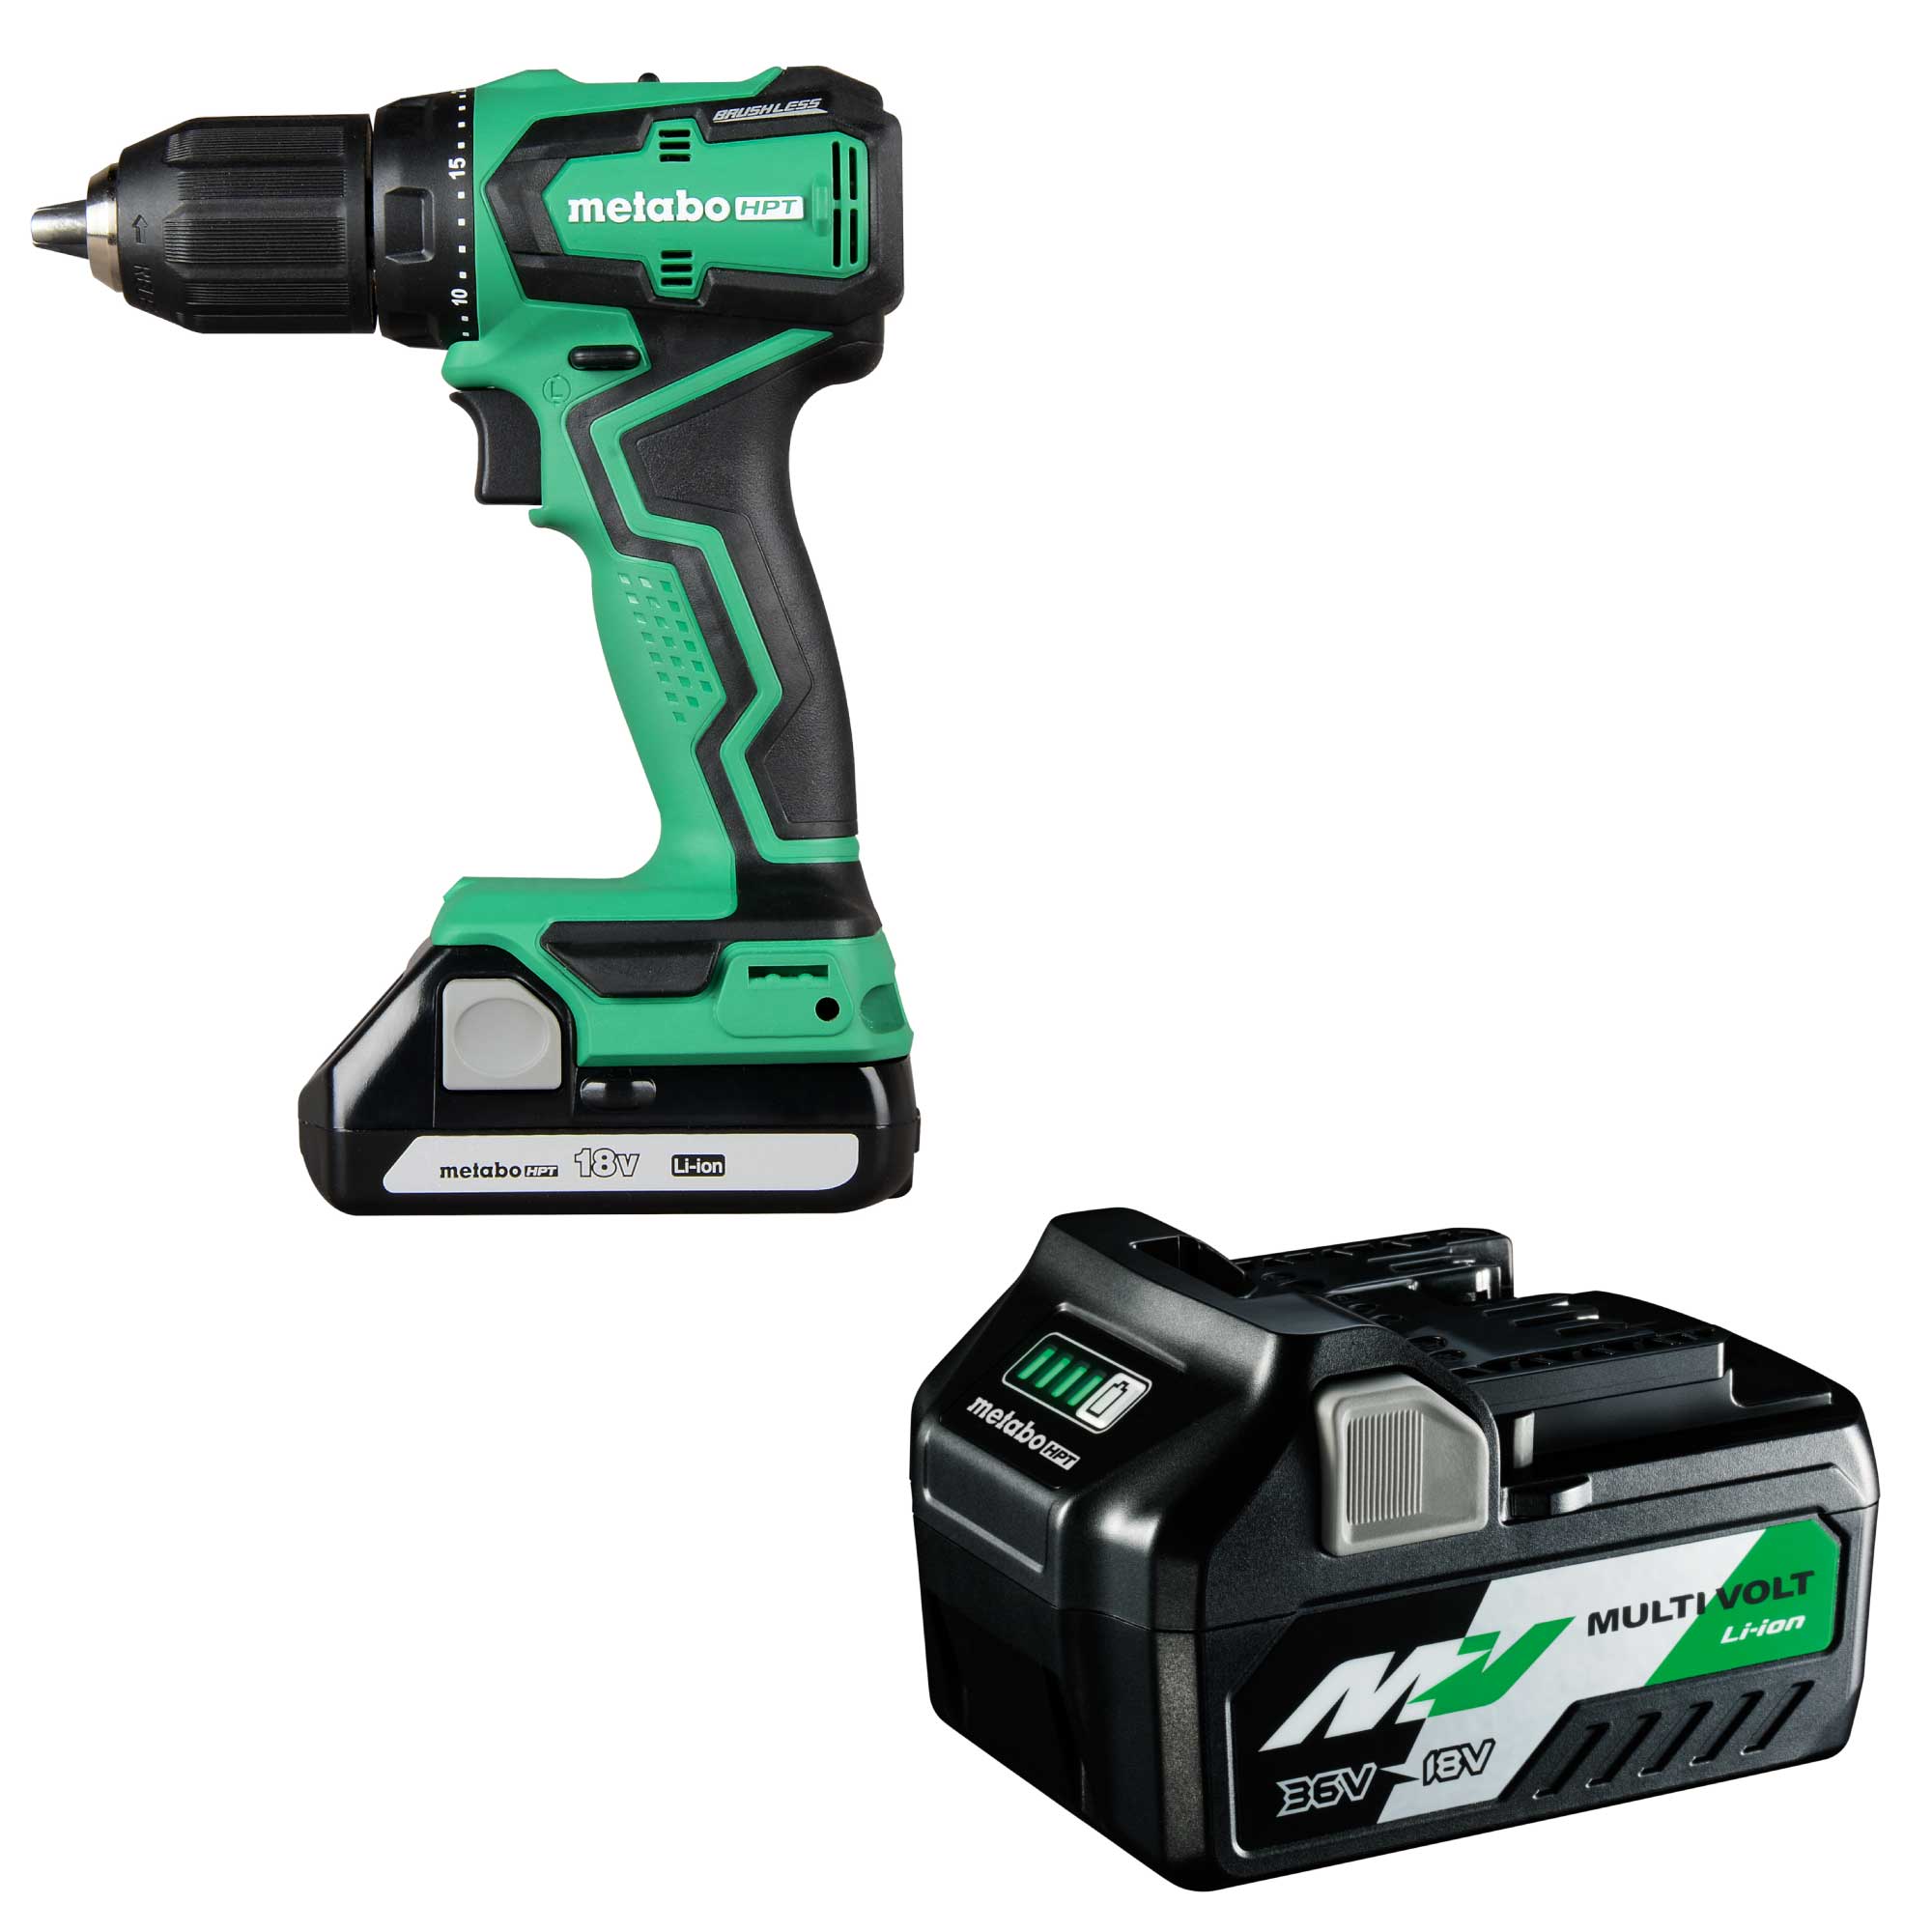 Metabo HPT MultiVolt 18-volt 1/2-in Keyless Brushless Cordless Drill (2-batteries included and Charger included) with MultiVolt 2.5Ah/5.0Ah Power